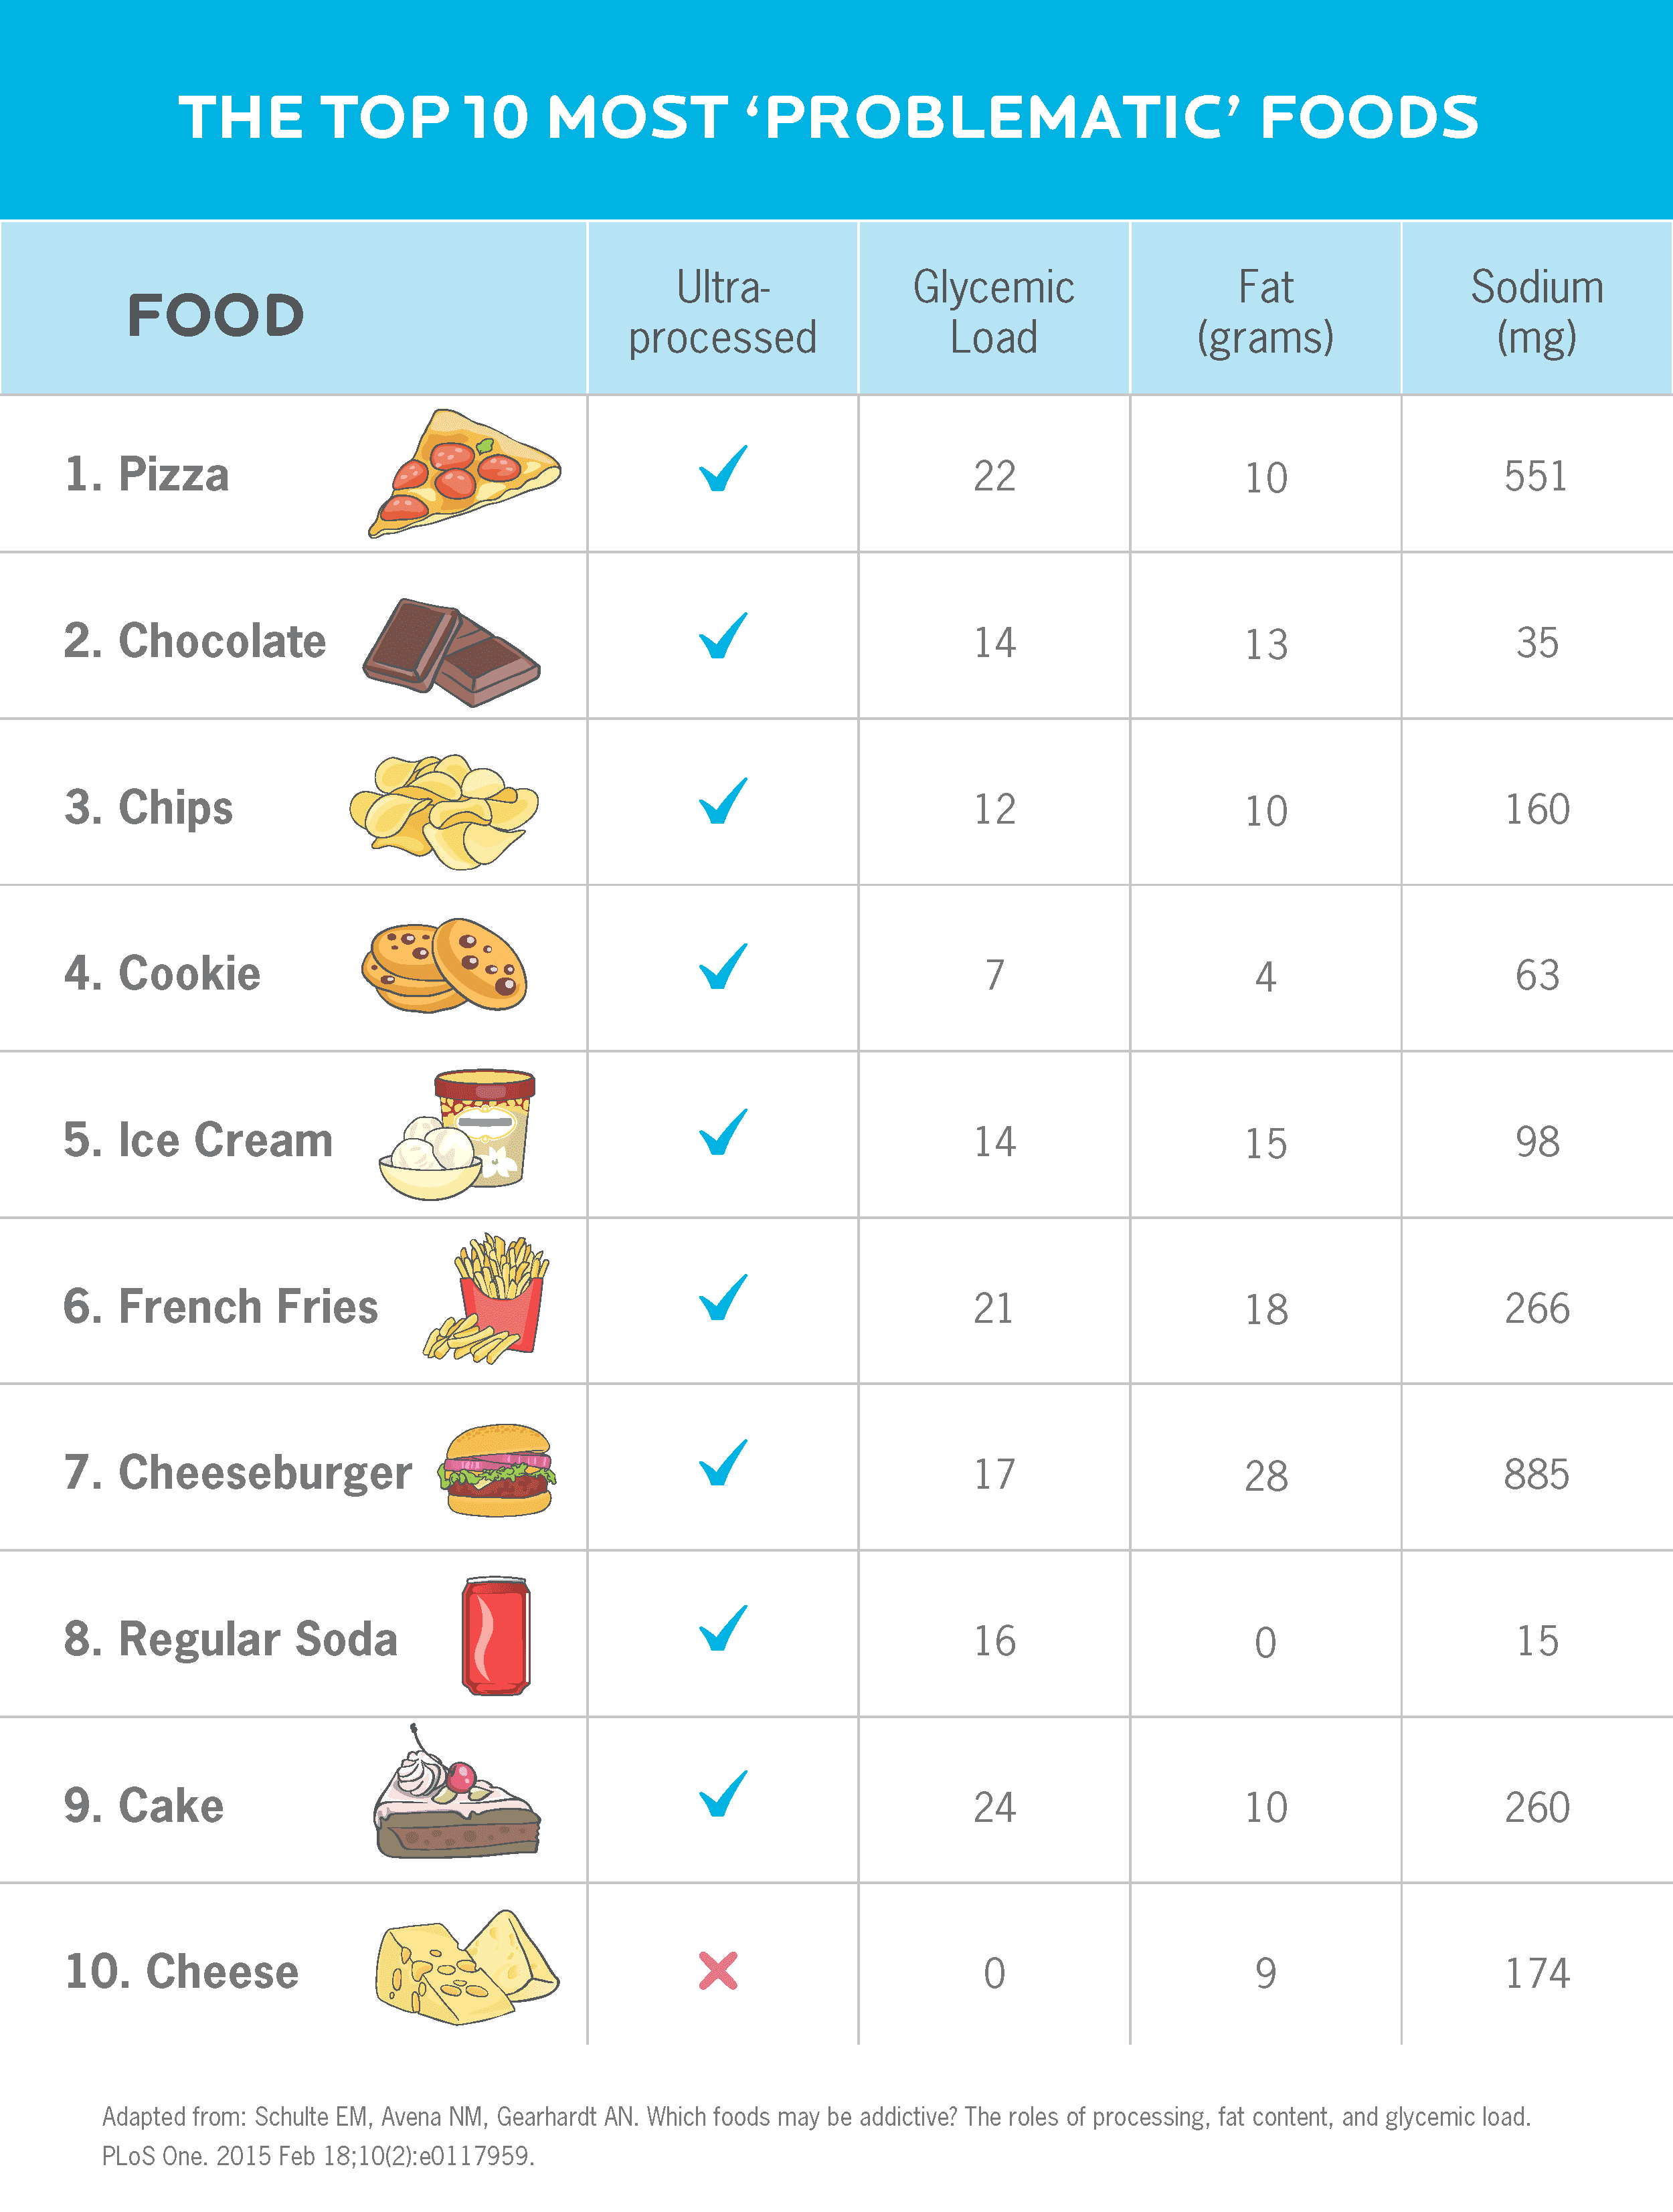 A chart showing the top 10 most "addictive" foods. In order, they are: 1) pizza, 2) chocolate, 3) chips, 4) cookie, 5) ice cream, 6) French fries, 7) cheeseburger, 8) regular soda, 9) cake, 10) cheese.) All but one of the foods (cheese) are ultra-processed.